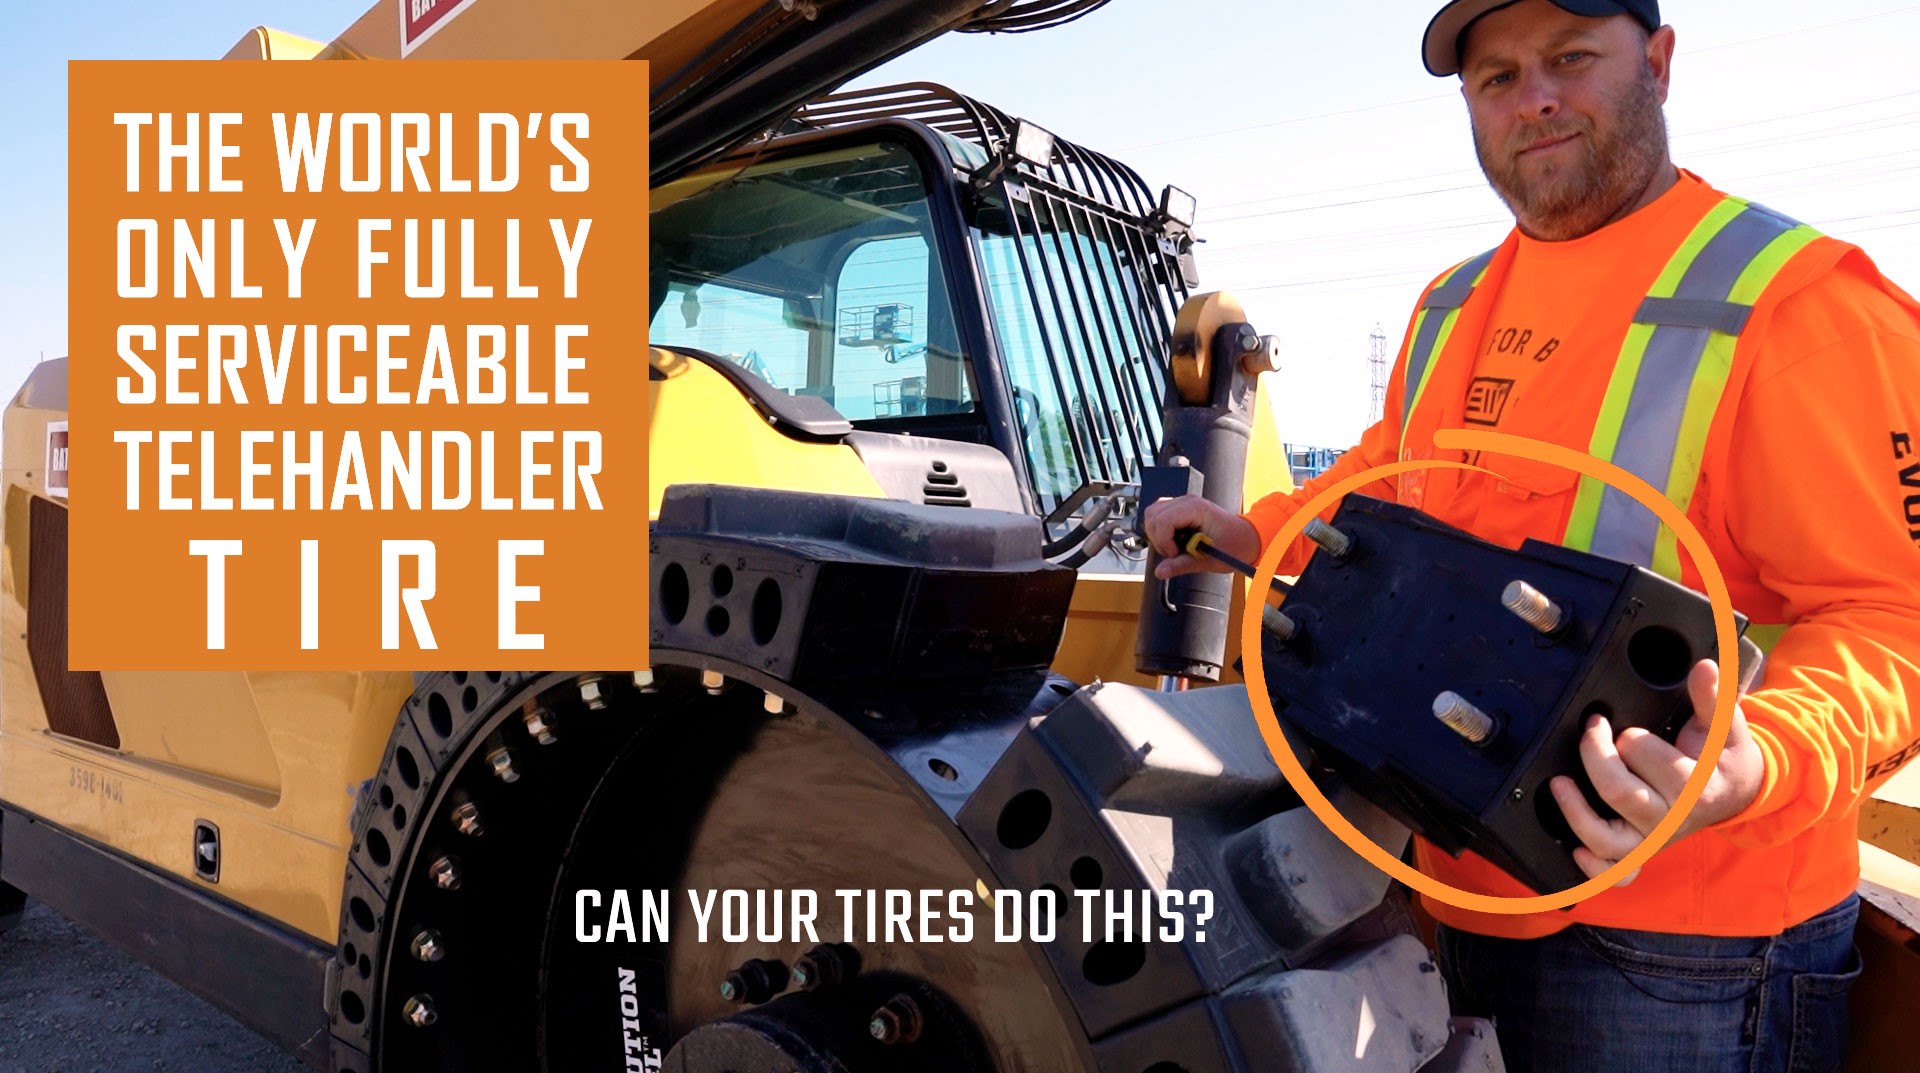 This video is about the world's only fully serviceable Gradall tires